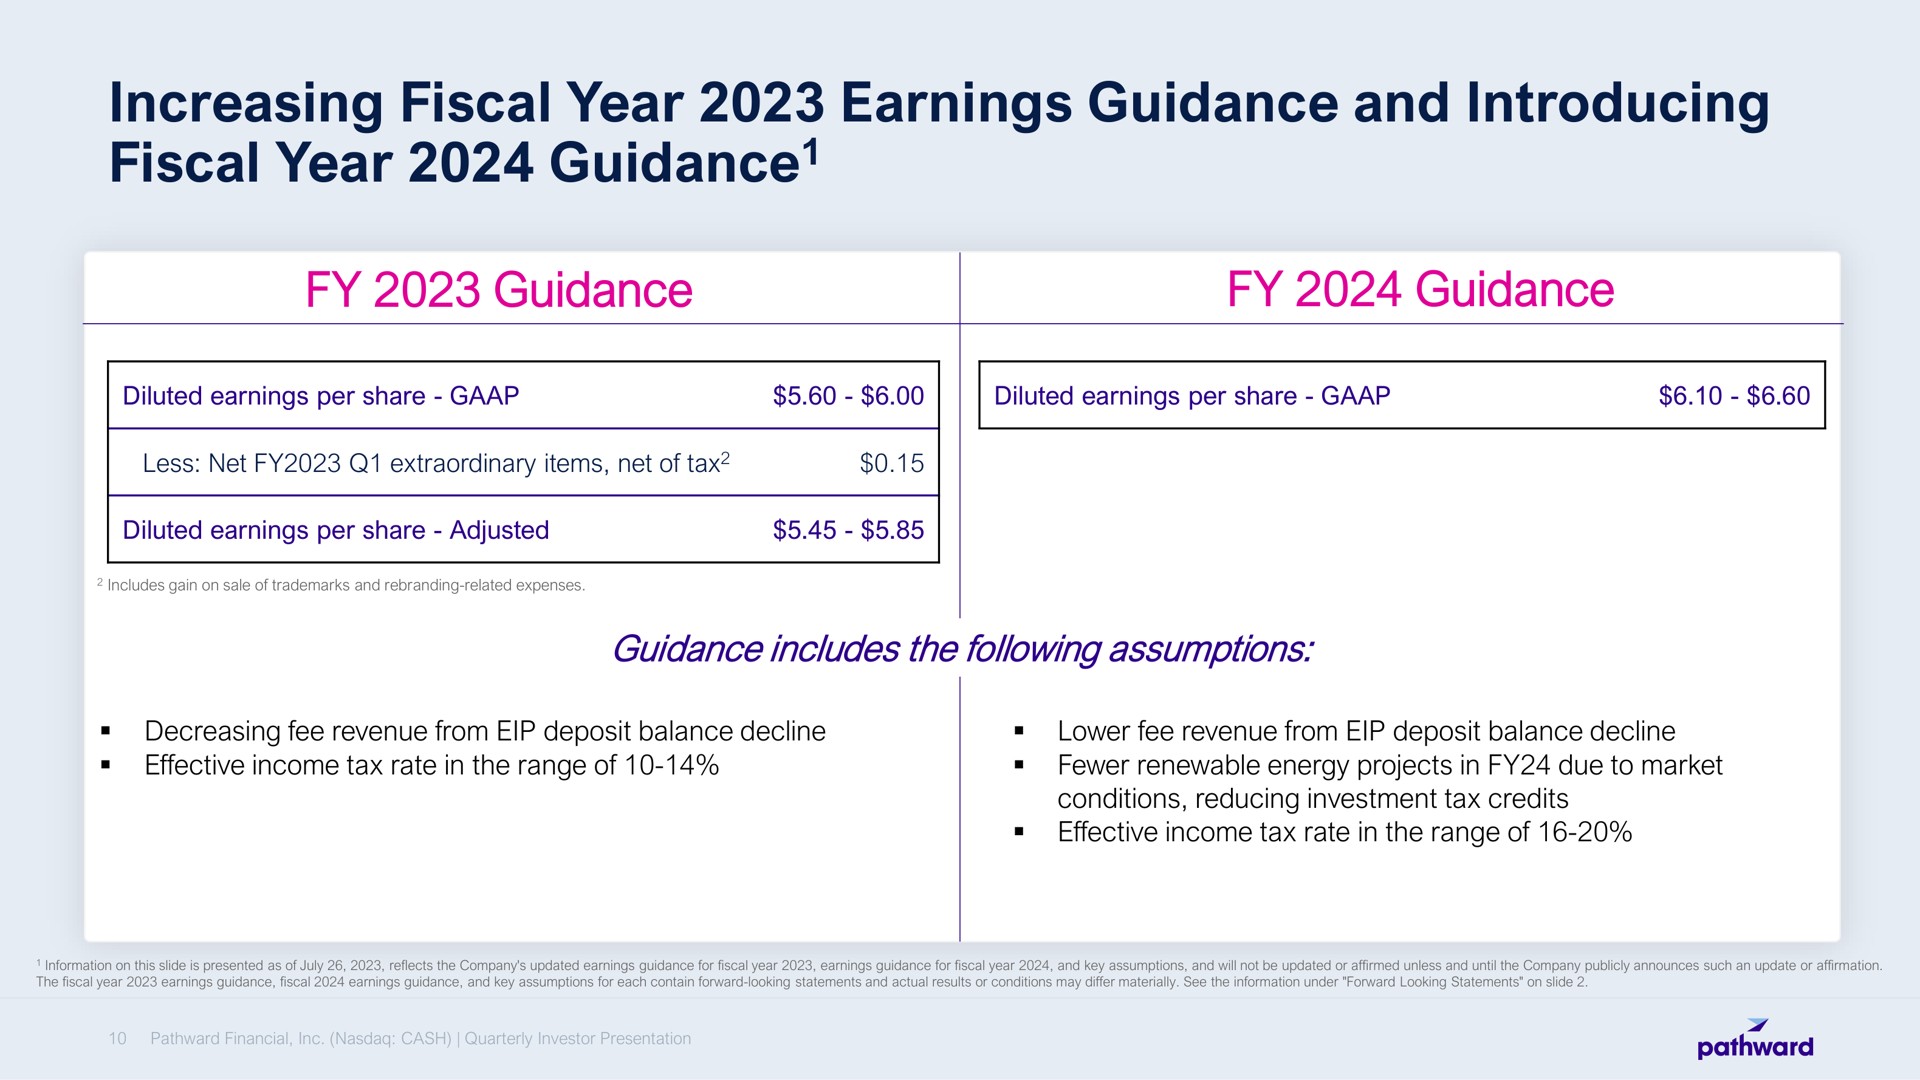 increasing fiscal year earnings guidance and introducing fiscal year guidance guidance guidance | Pathward Financial